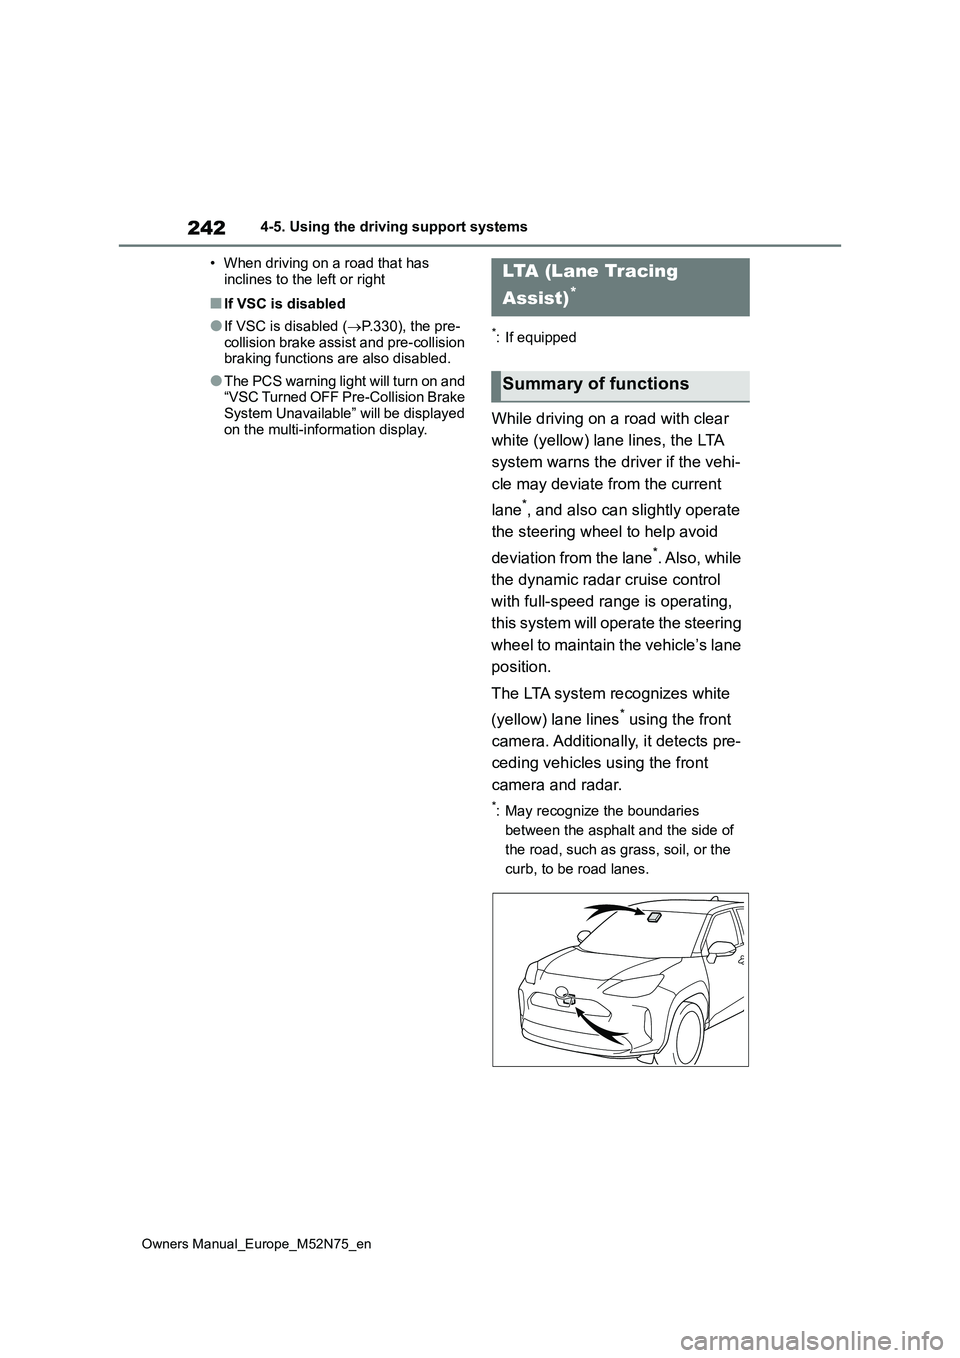 TOYOTA YARIS CROSS 2023  Owners Manual 242
Owners Manual_Europe_M52N75_en
4-5. Using the driving support systems 
• When driving on a road that has  
inclines to the left or right
■If VSC is disabled
●If VSC is disabled ( P.330), 